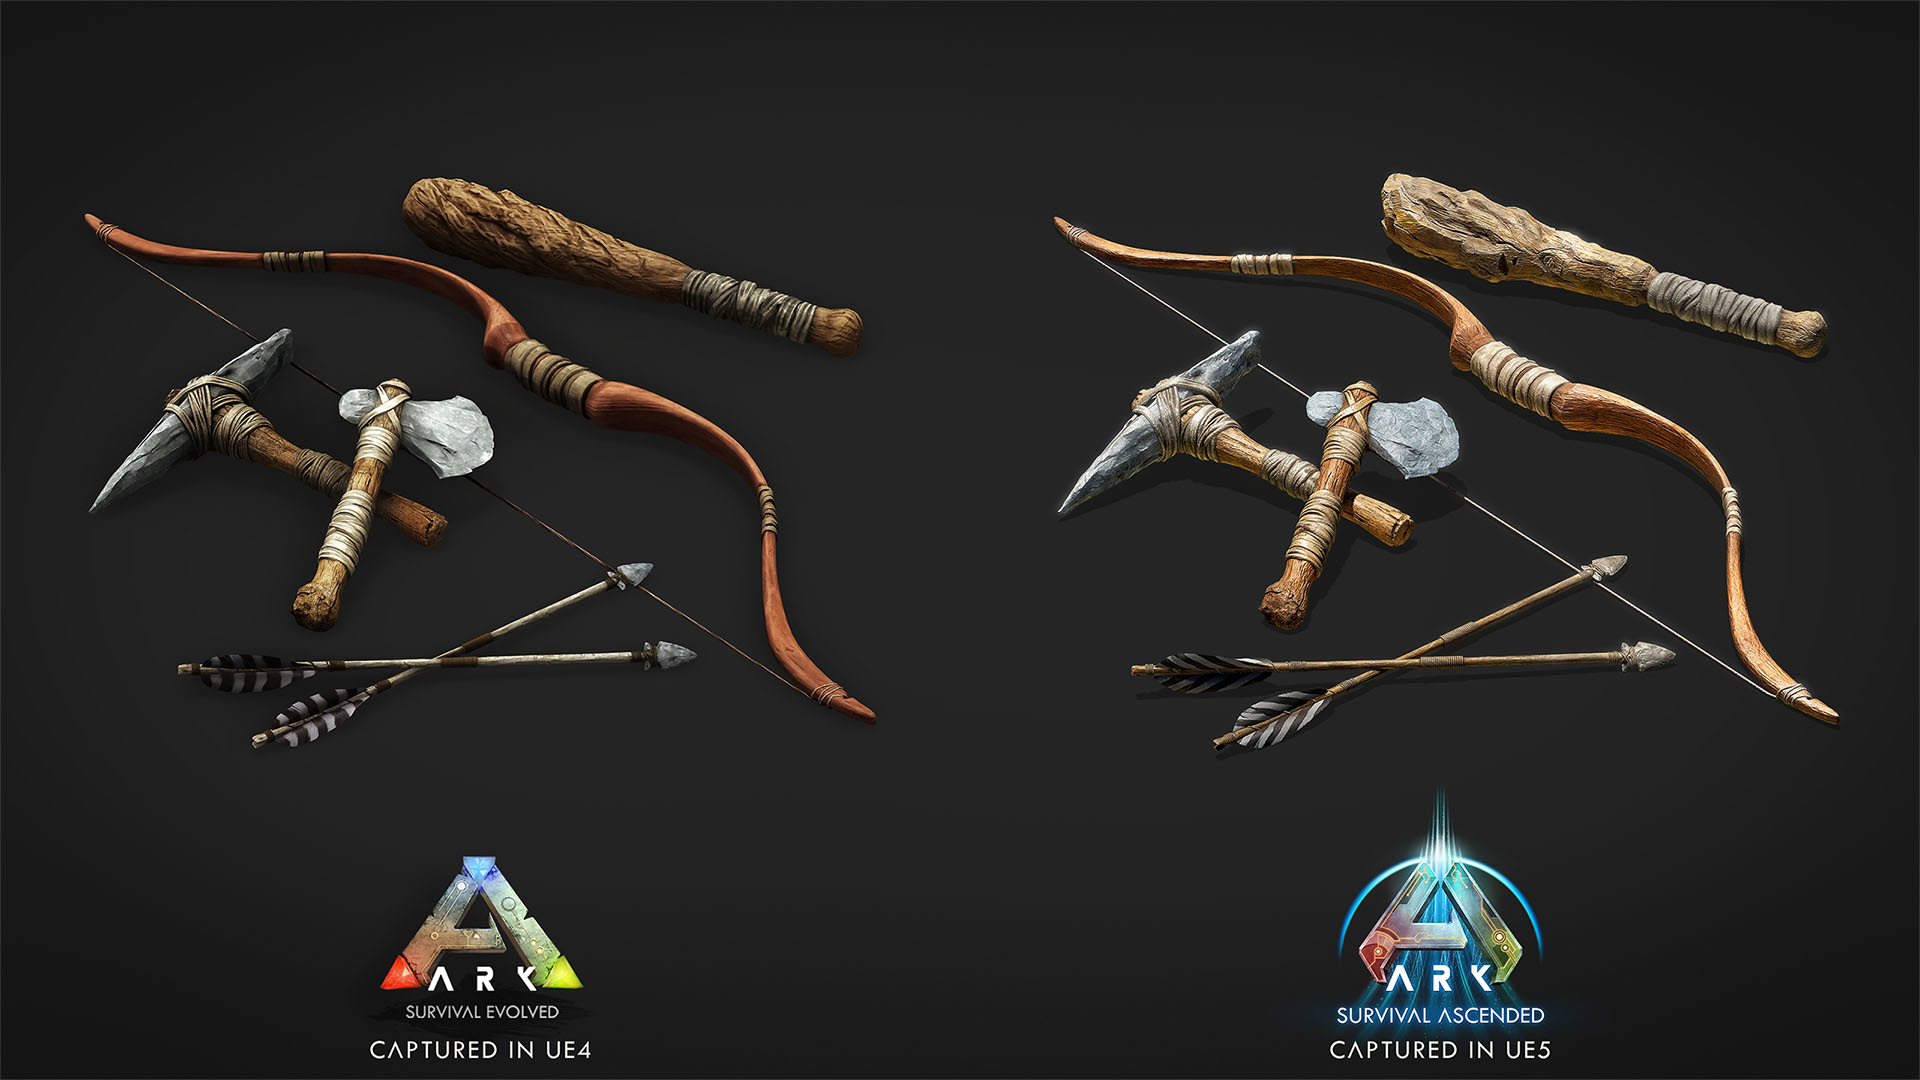 Ark Survival Ascended: Best PC Specifications and Minimum Requirements